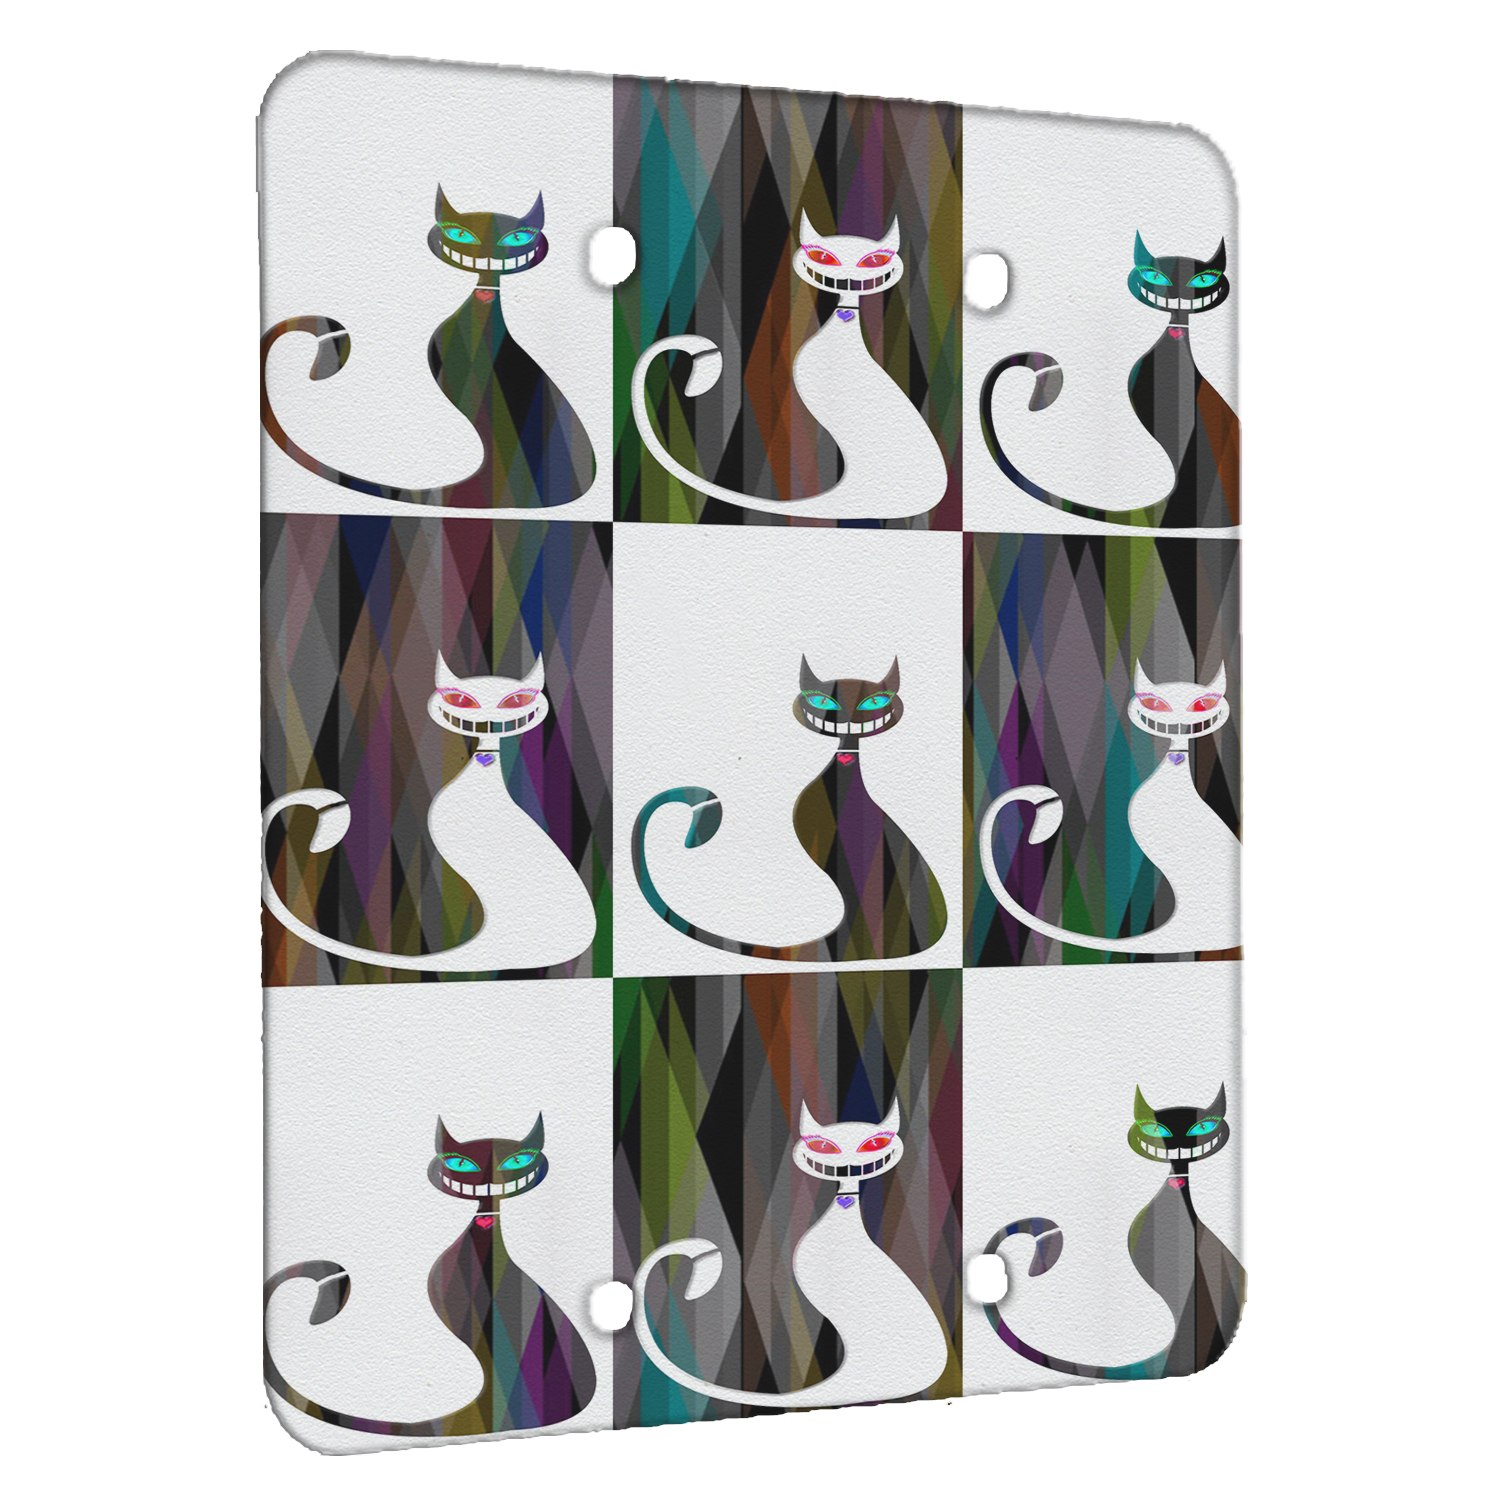 2 Gang Decora/GFCI Elements of Space Pussy Cat Retro Pop Metal Wall Plate